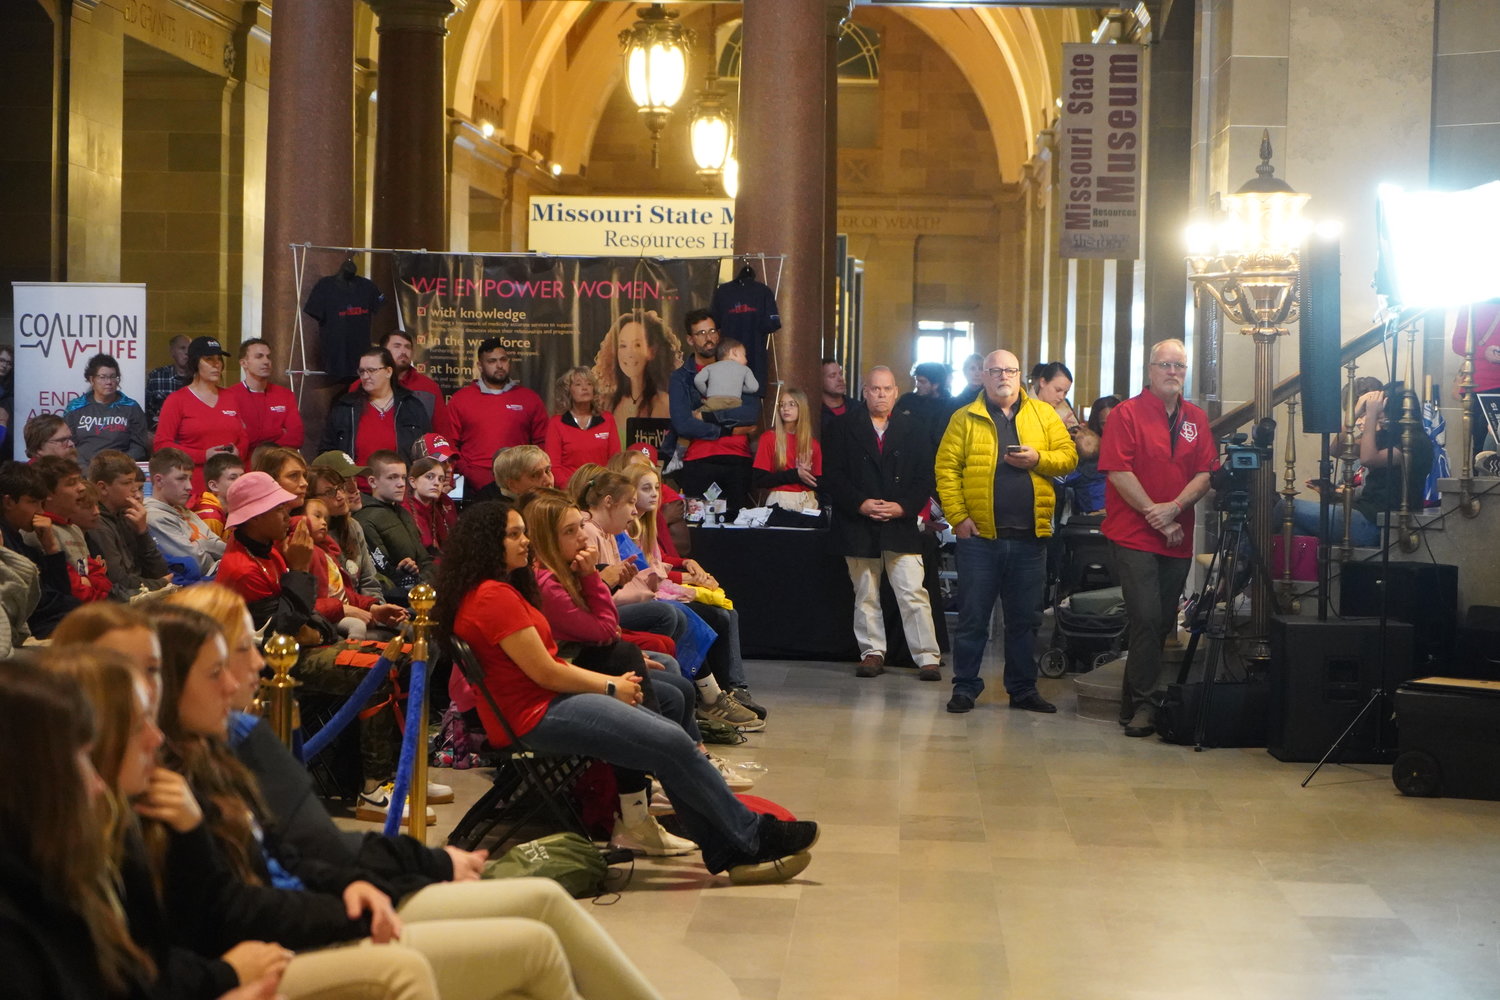 More than 2,000 people attend a rally in the Rotunda of the Missouri State Capitol April 20 in conjunction with the Midwest March for Life.